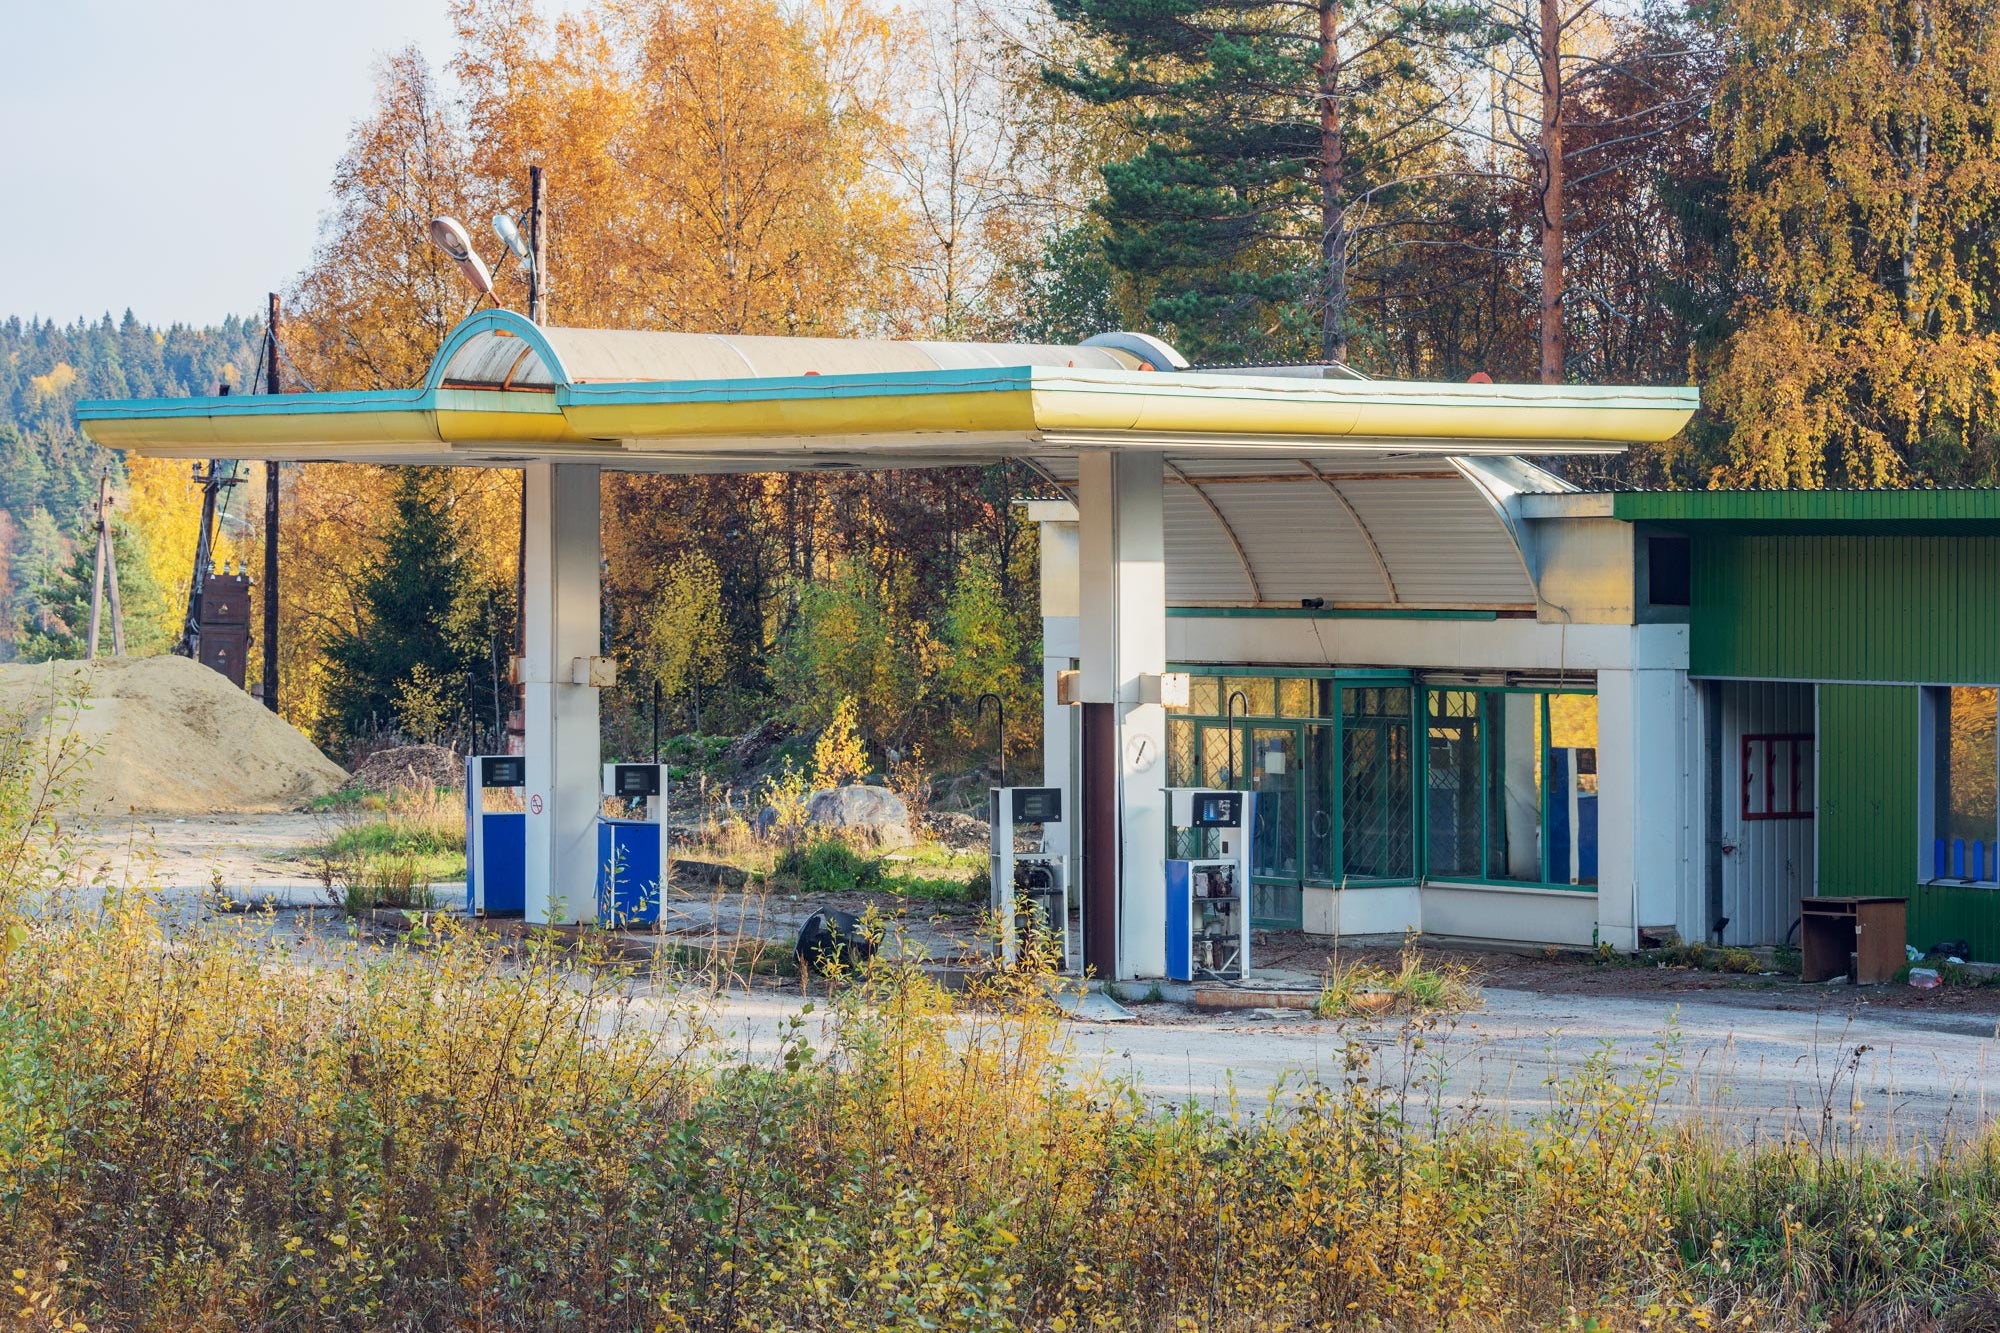 A charming old-fashioned gas station sits empty against a scenic backdrop of mountains with changing autumn leaves. 